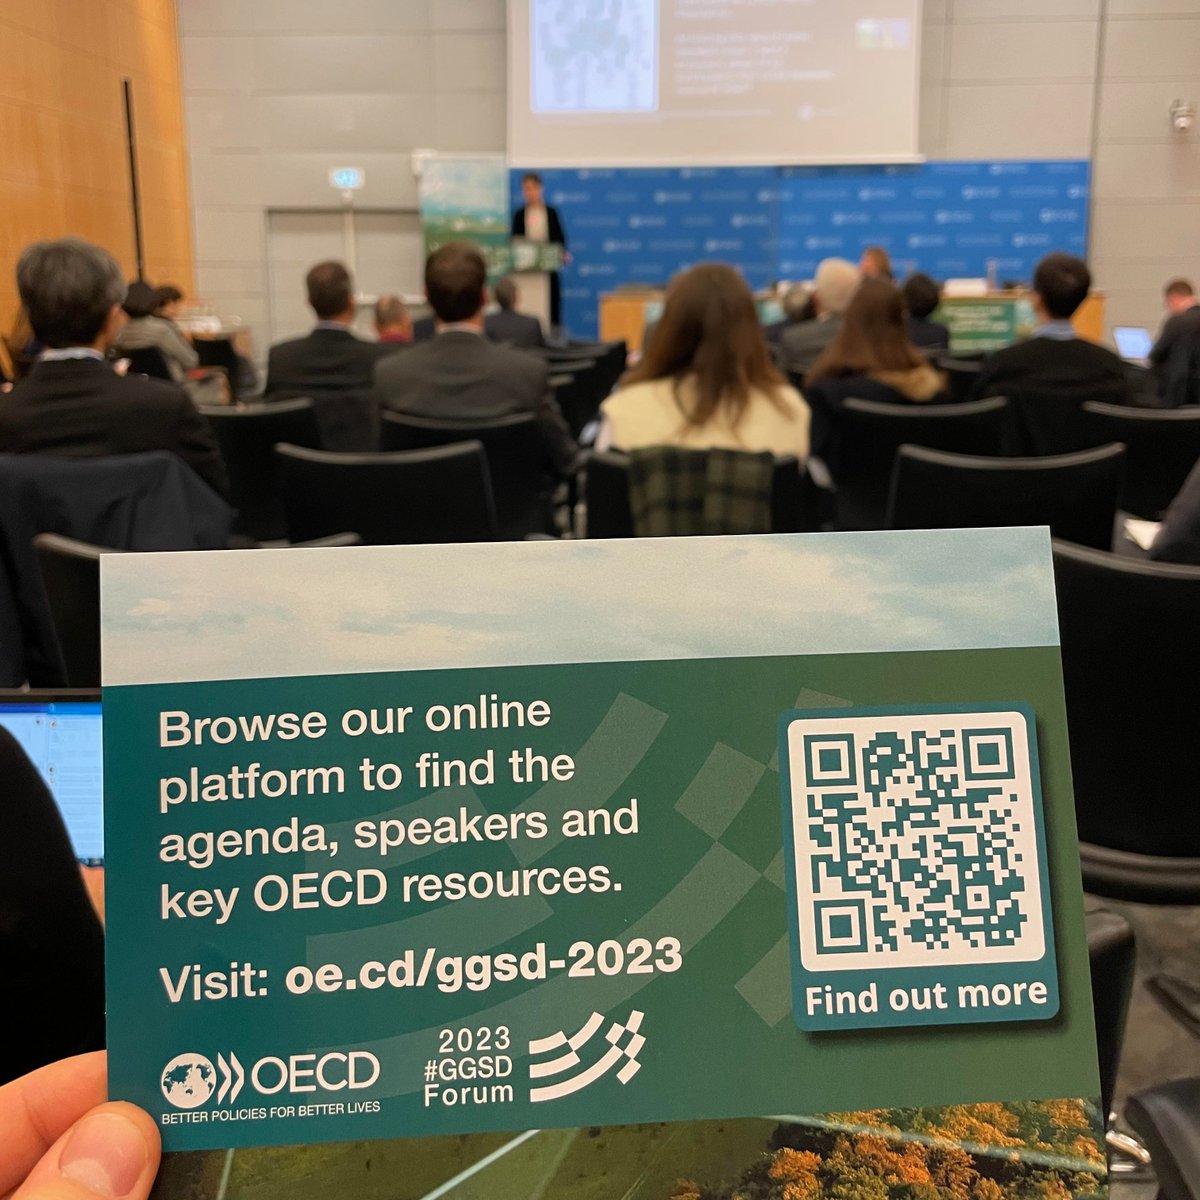 The @OECD Green Growth and Sustainable Development Forum is live 🌱 Join engaging discussions with world-leading experts on how the #digital & green transitions could help build greener & fairer societies. 👉oe.cd/ggsd-2023 #GGSD